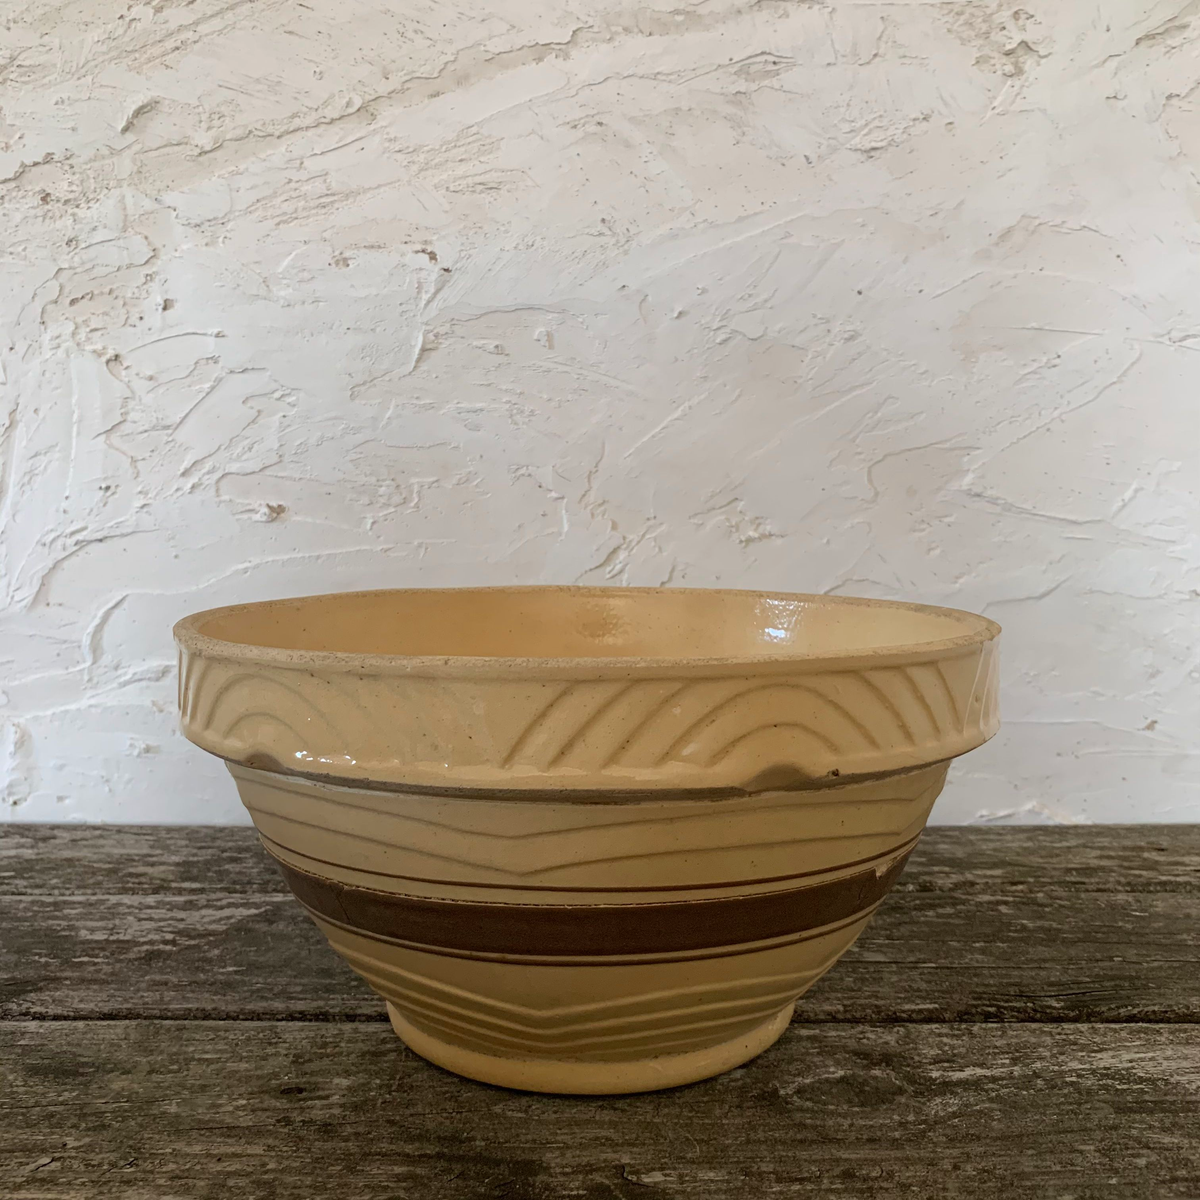 Yellow Ware Mixing Bowl Auction